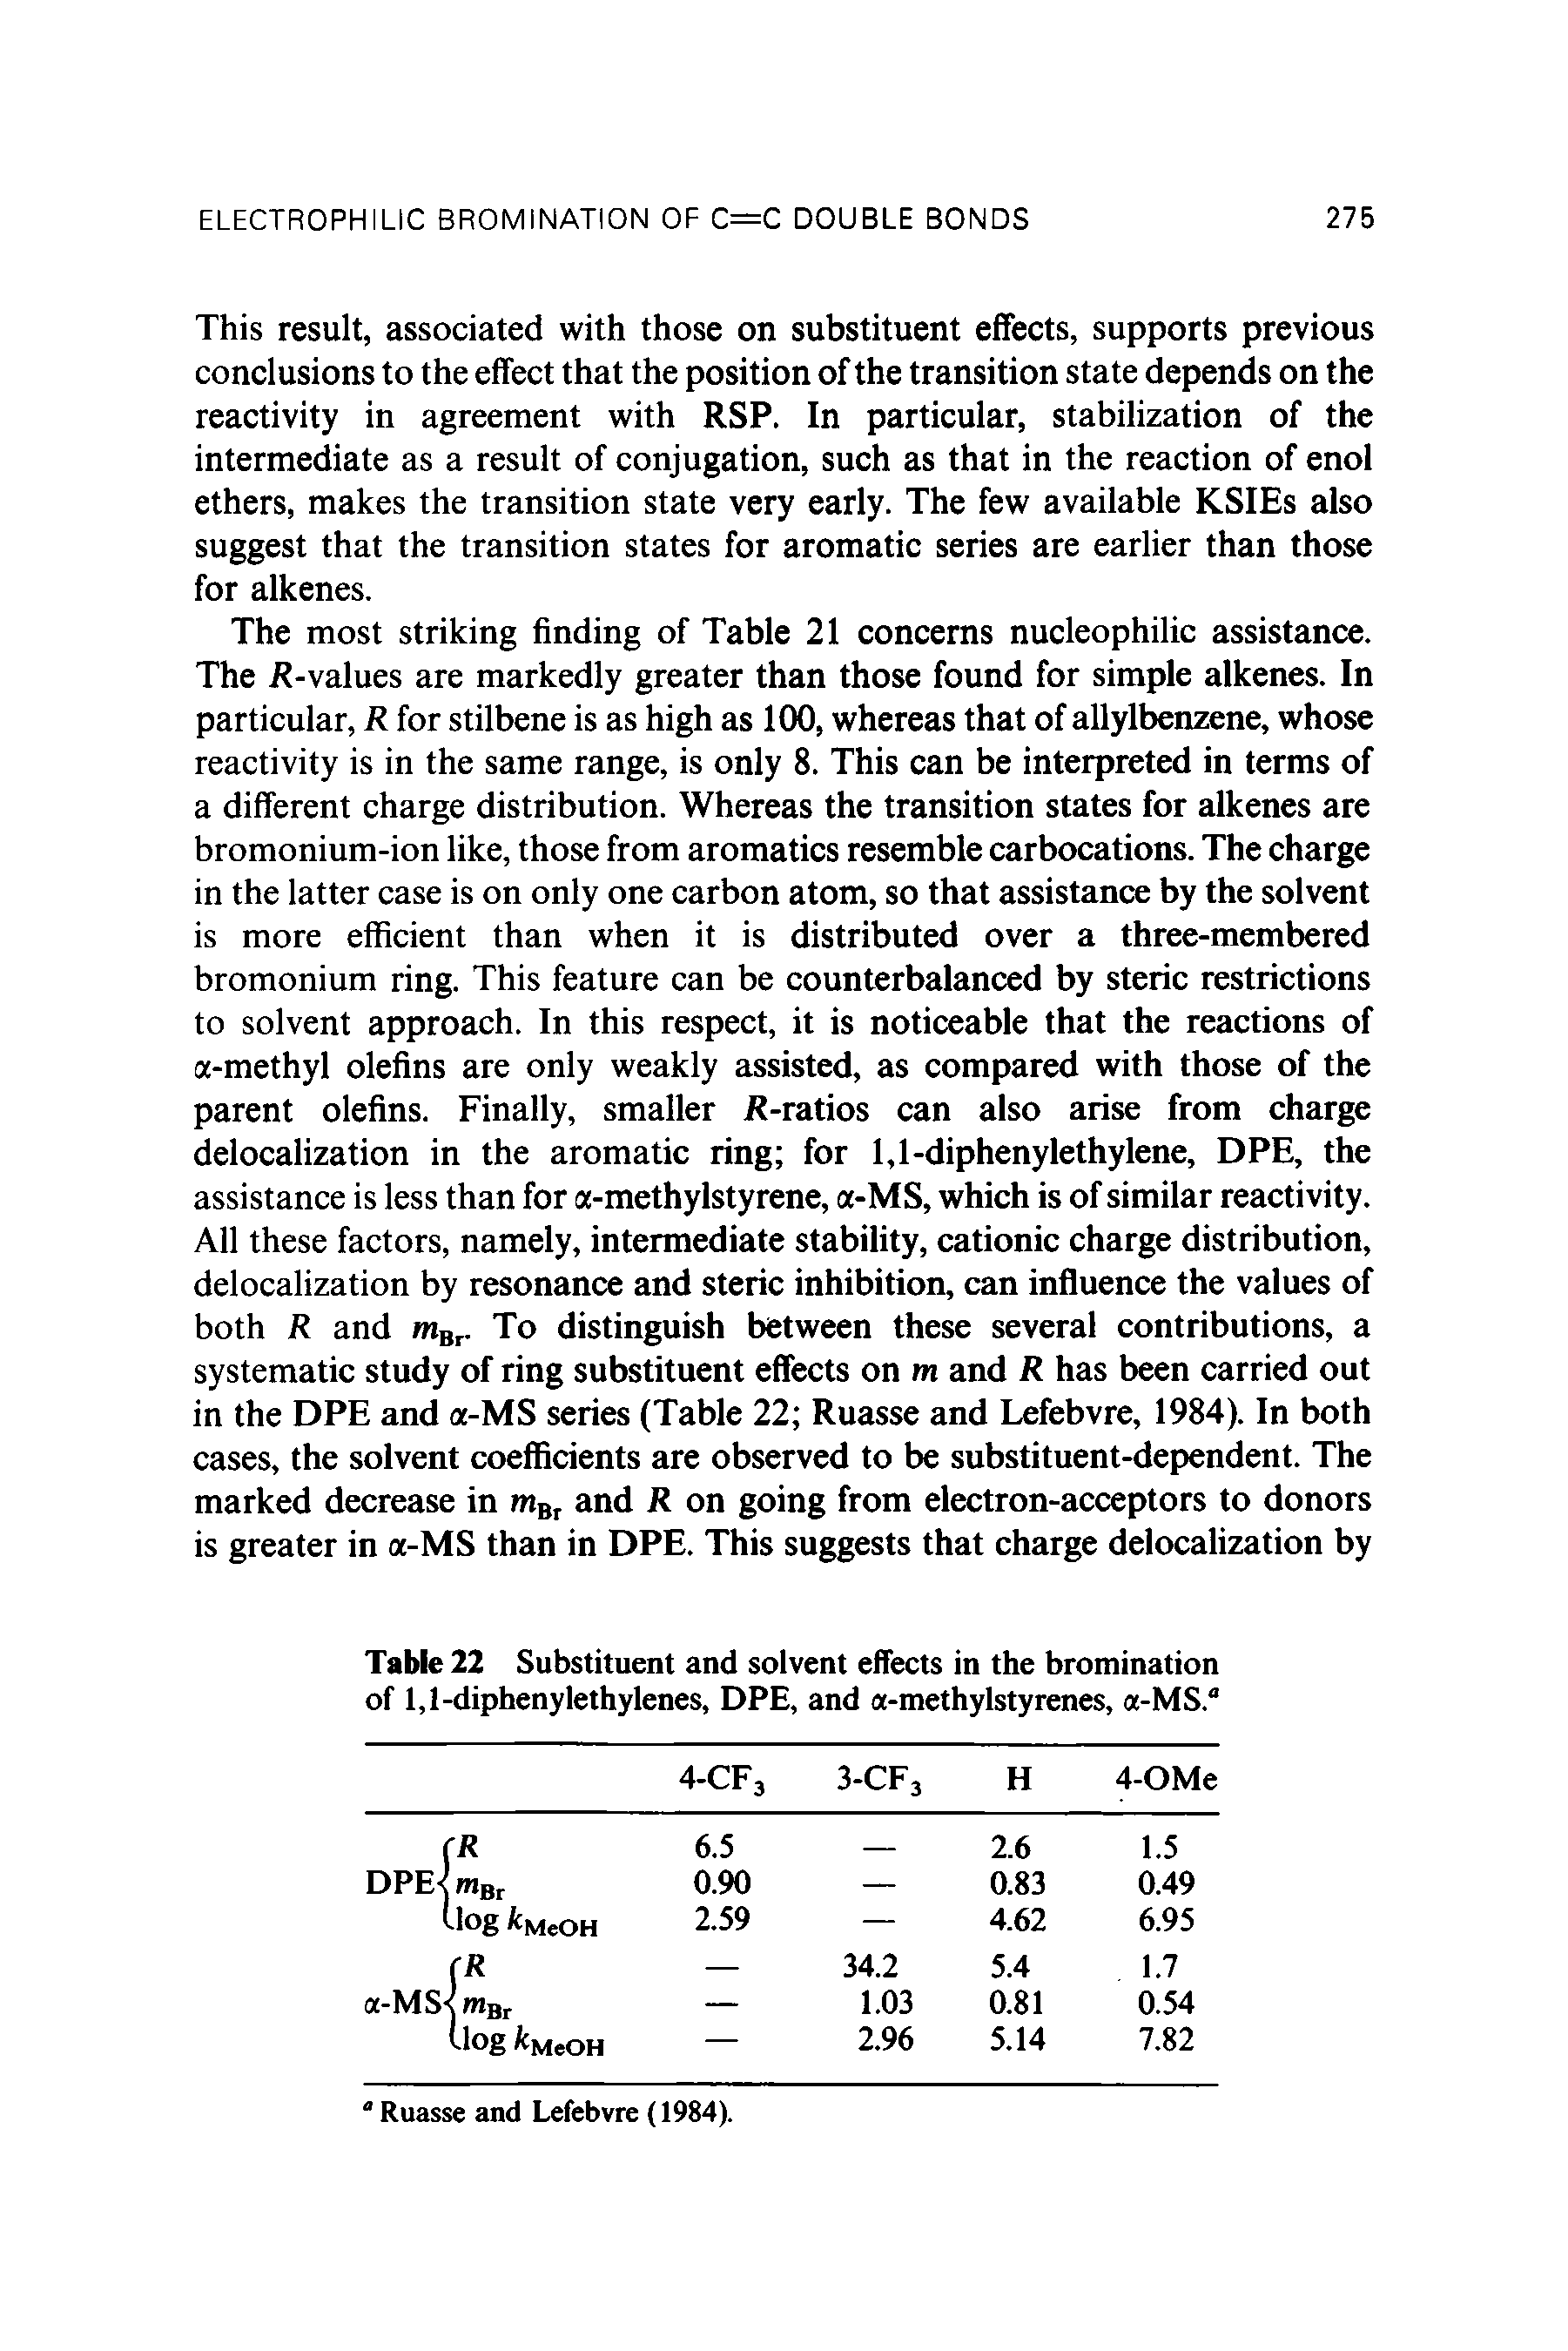 Table 22 Substituent and solvent effects in the bromination of 1,1-diphenylethylenes, DPE, and a-methylstyrenes, a-MS. 1...